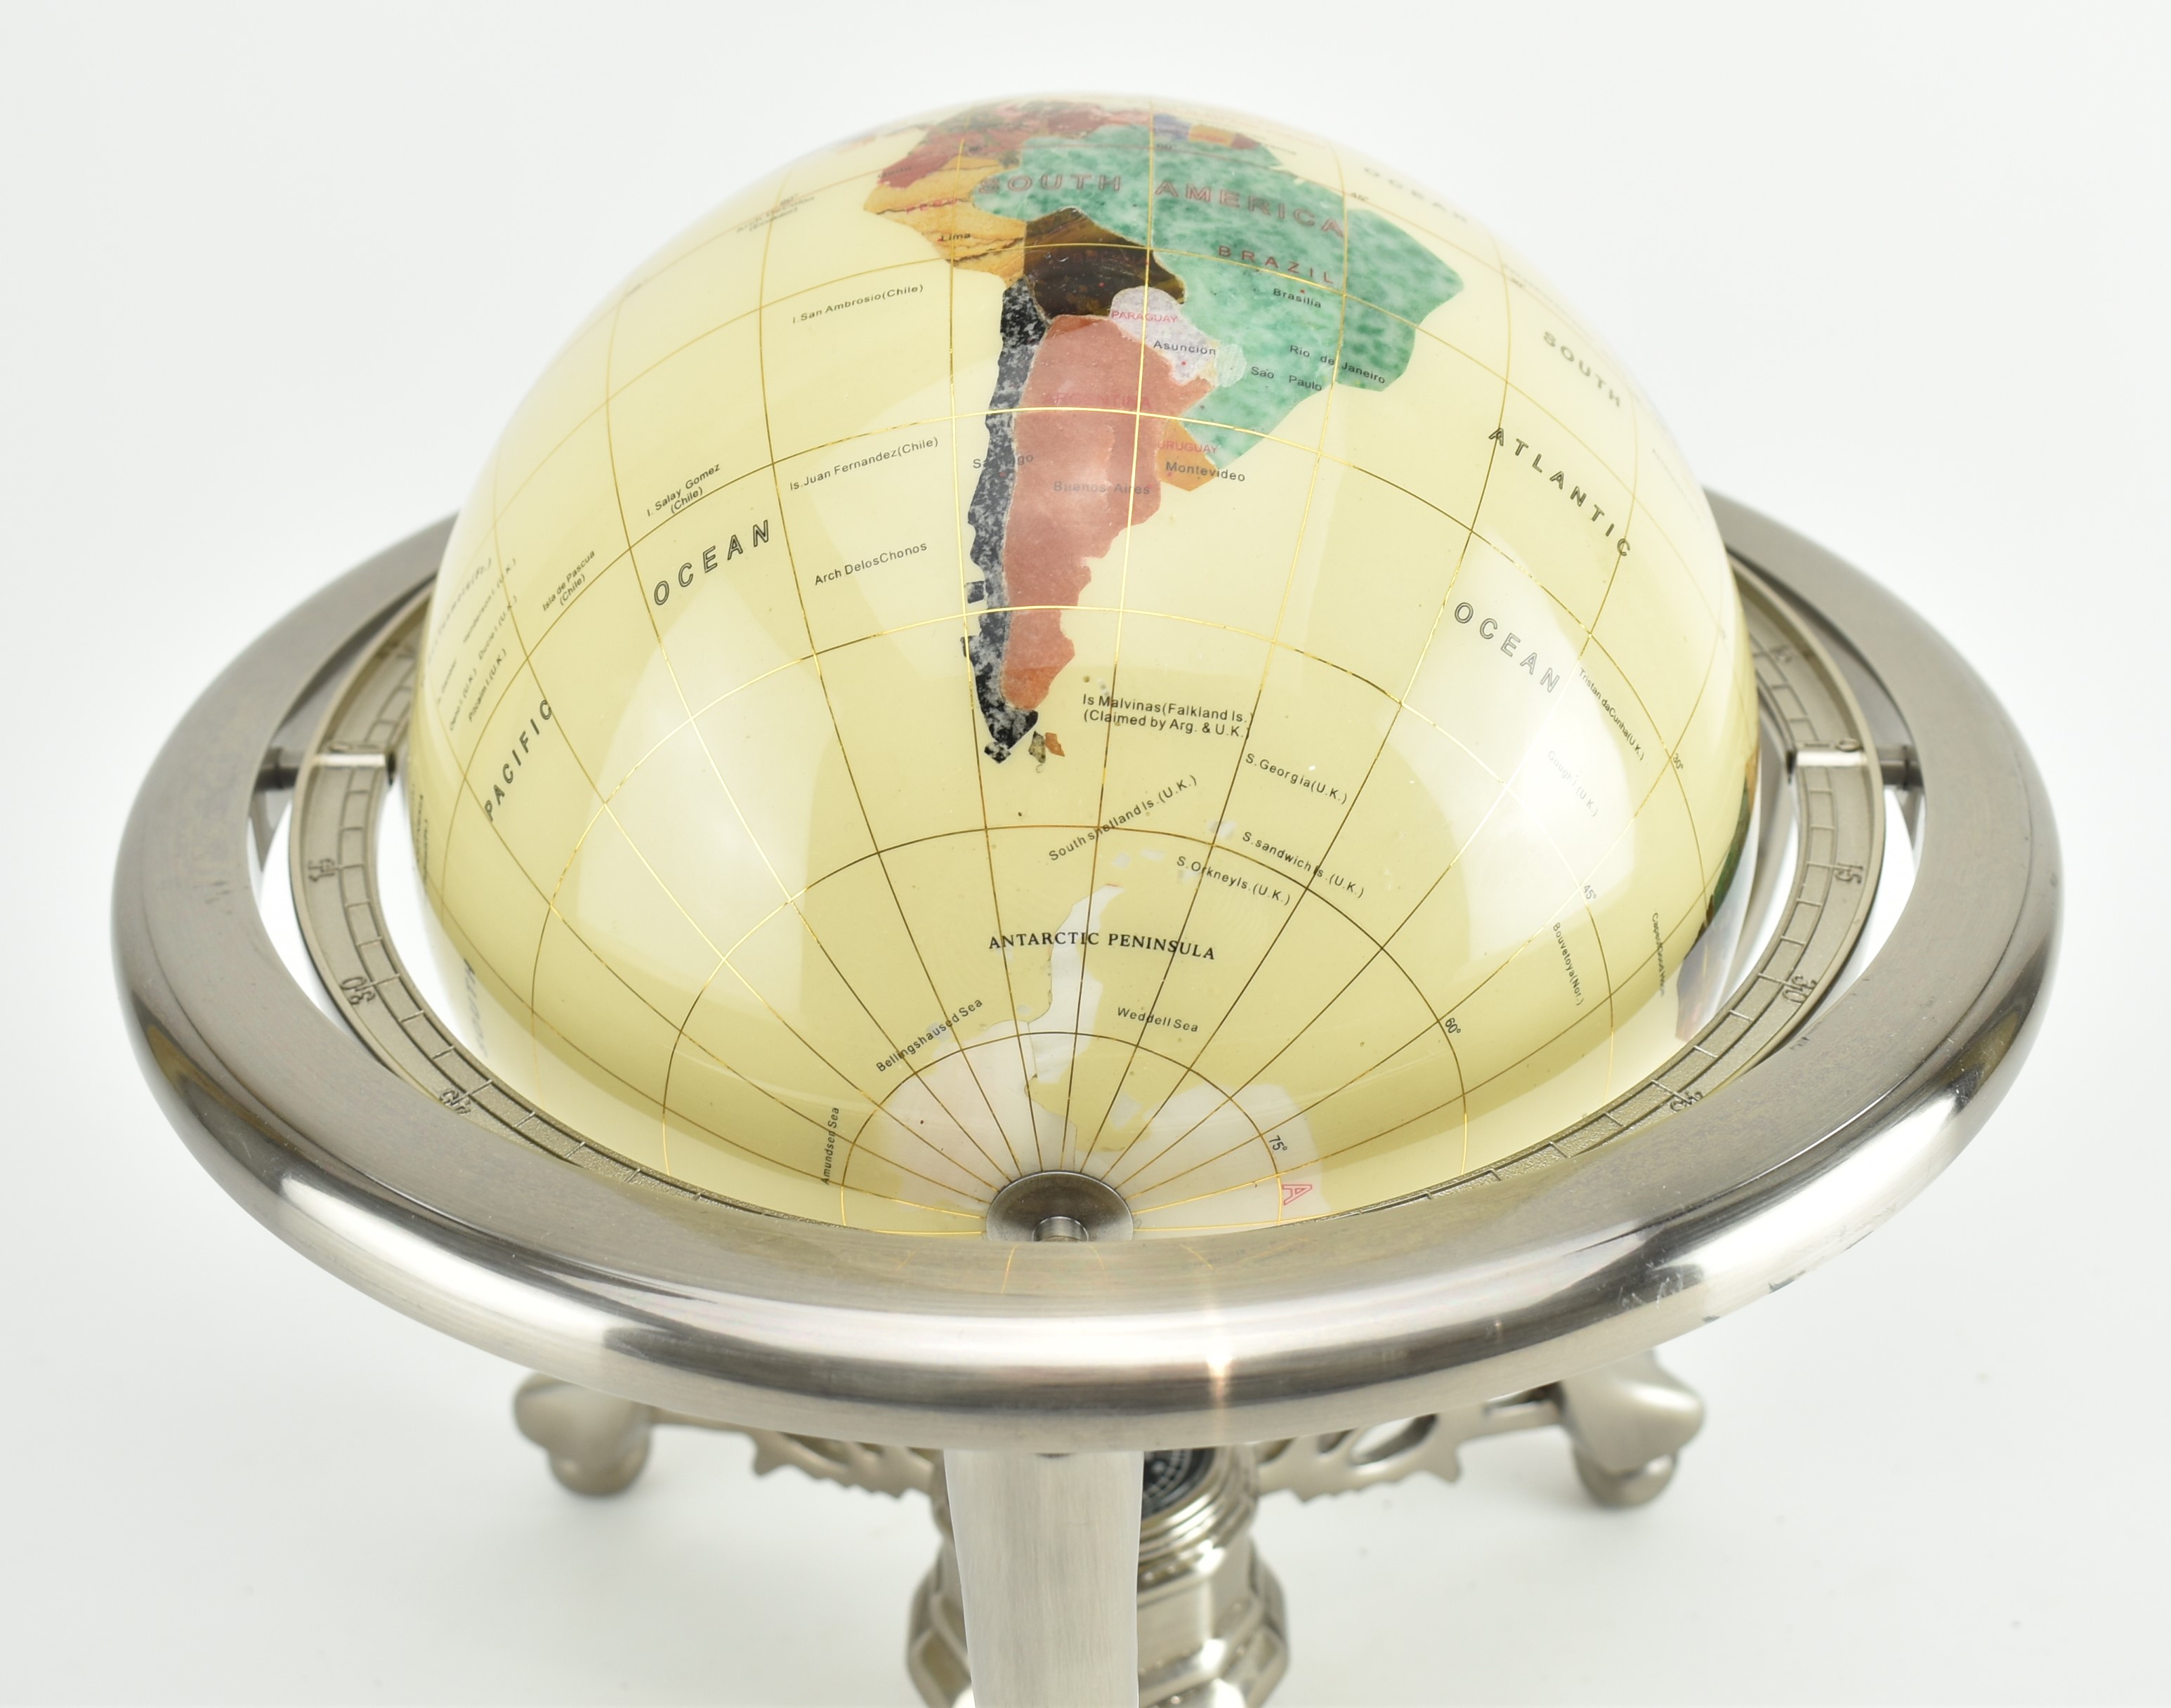 VINTAGE GEM INLAID GLOBE IN CHROME STAND - Image 4 of 7